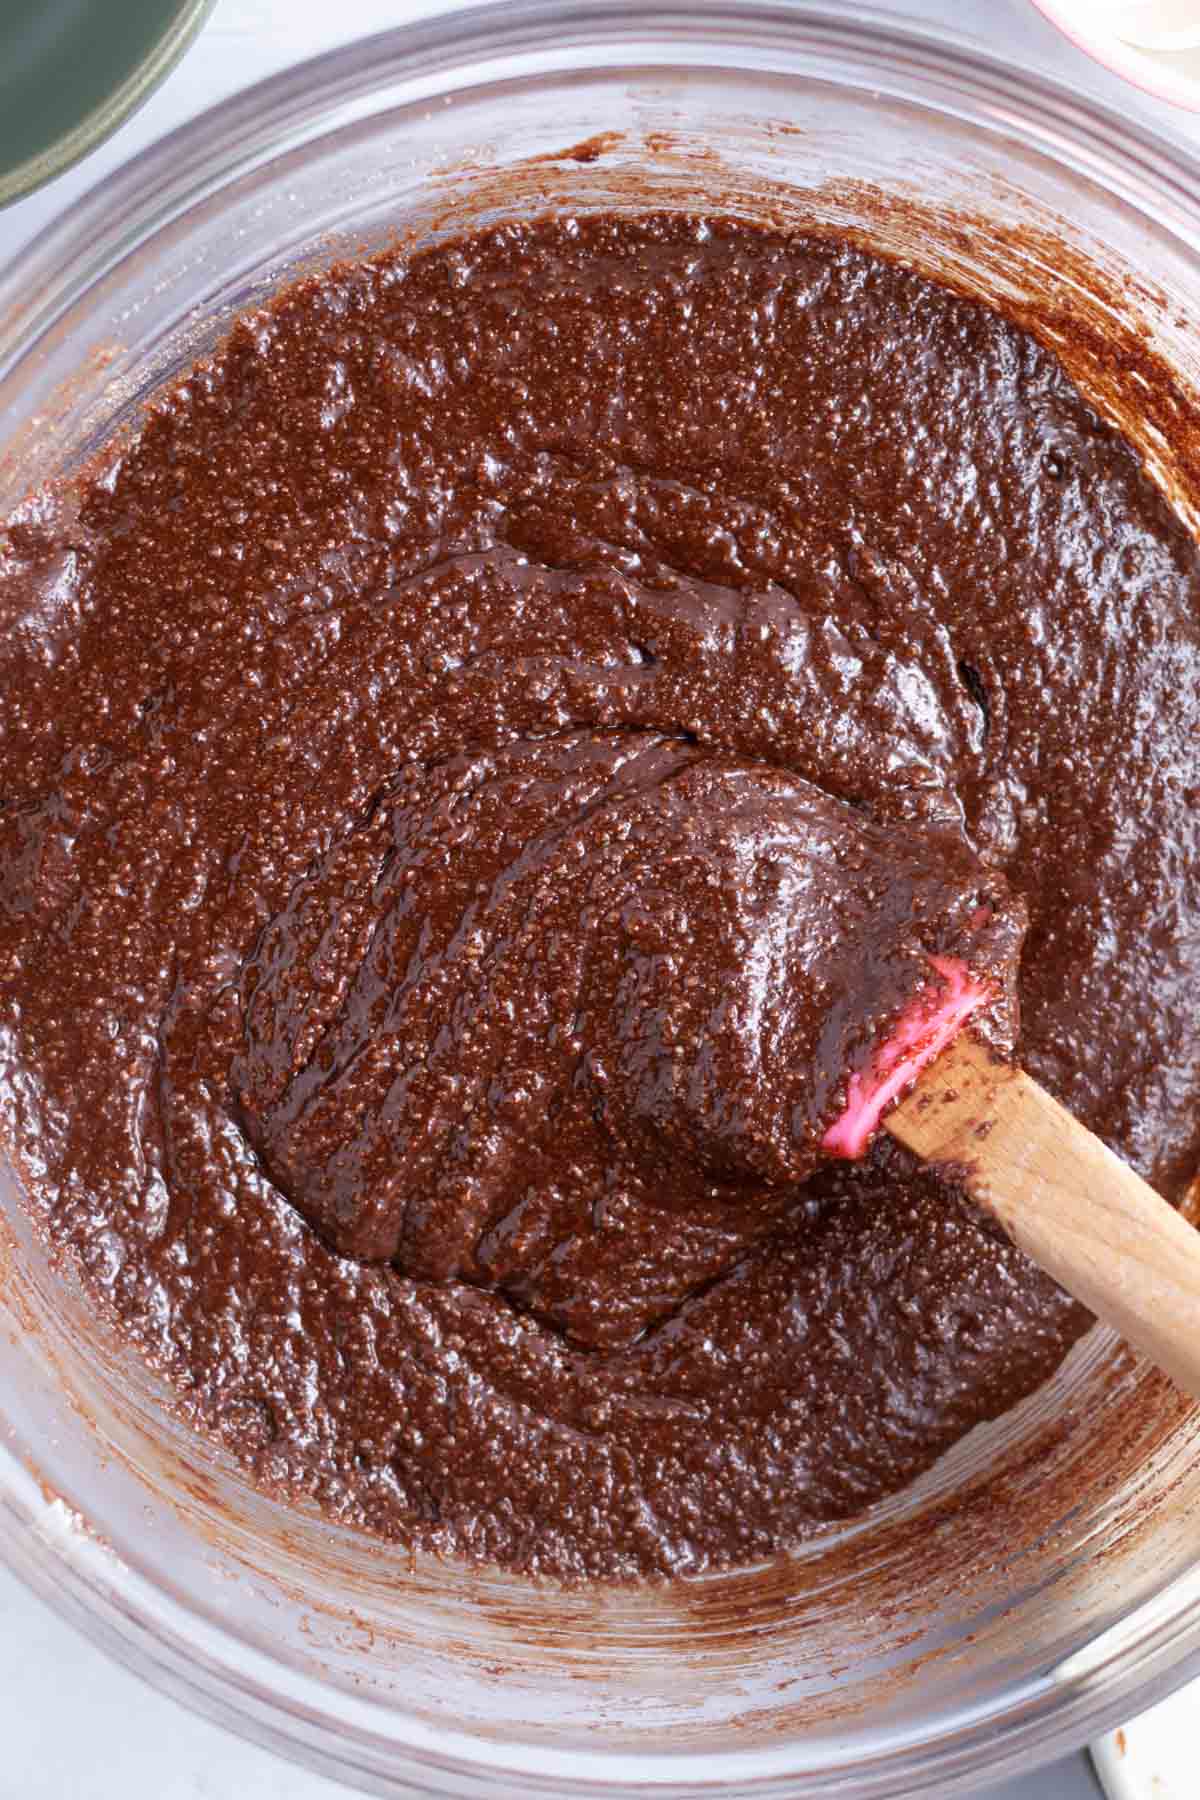 The brownie batter after the almond flour and other dry ingredients have been added.